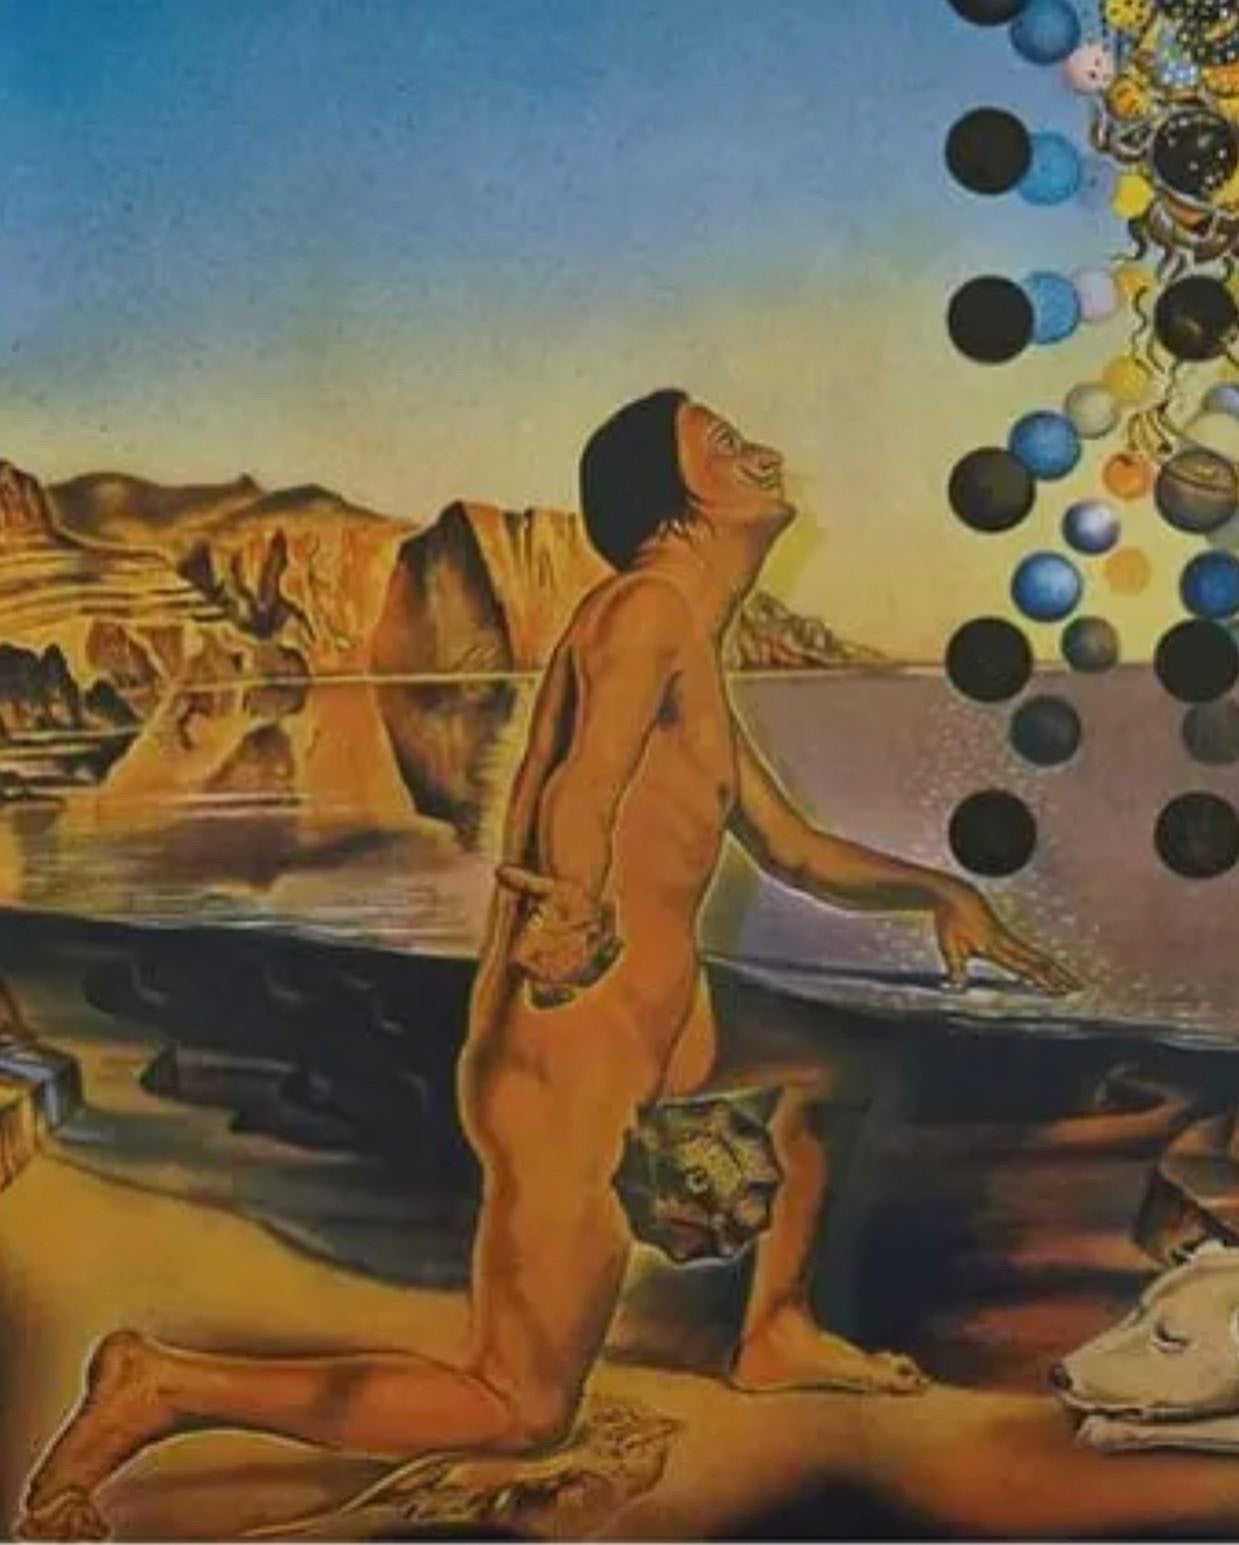 Limited Edition Lithograph attributed to Salvador Dali . “Dalí nude in conteplation before the five regular bodies”.